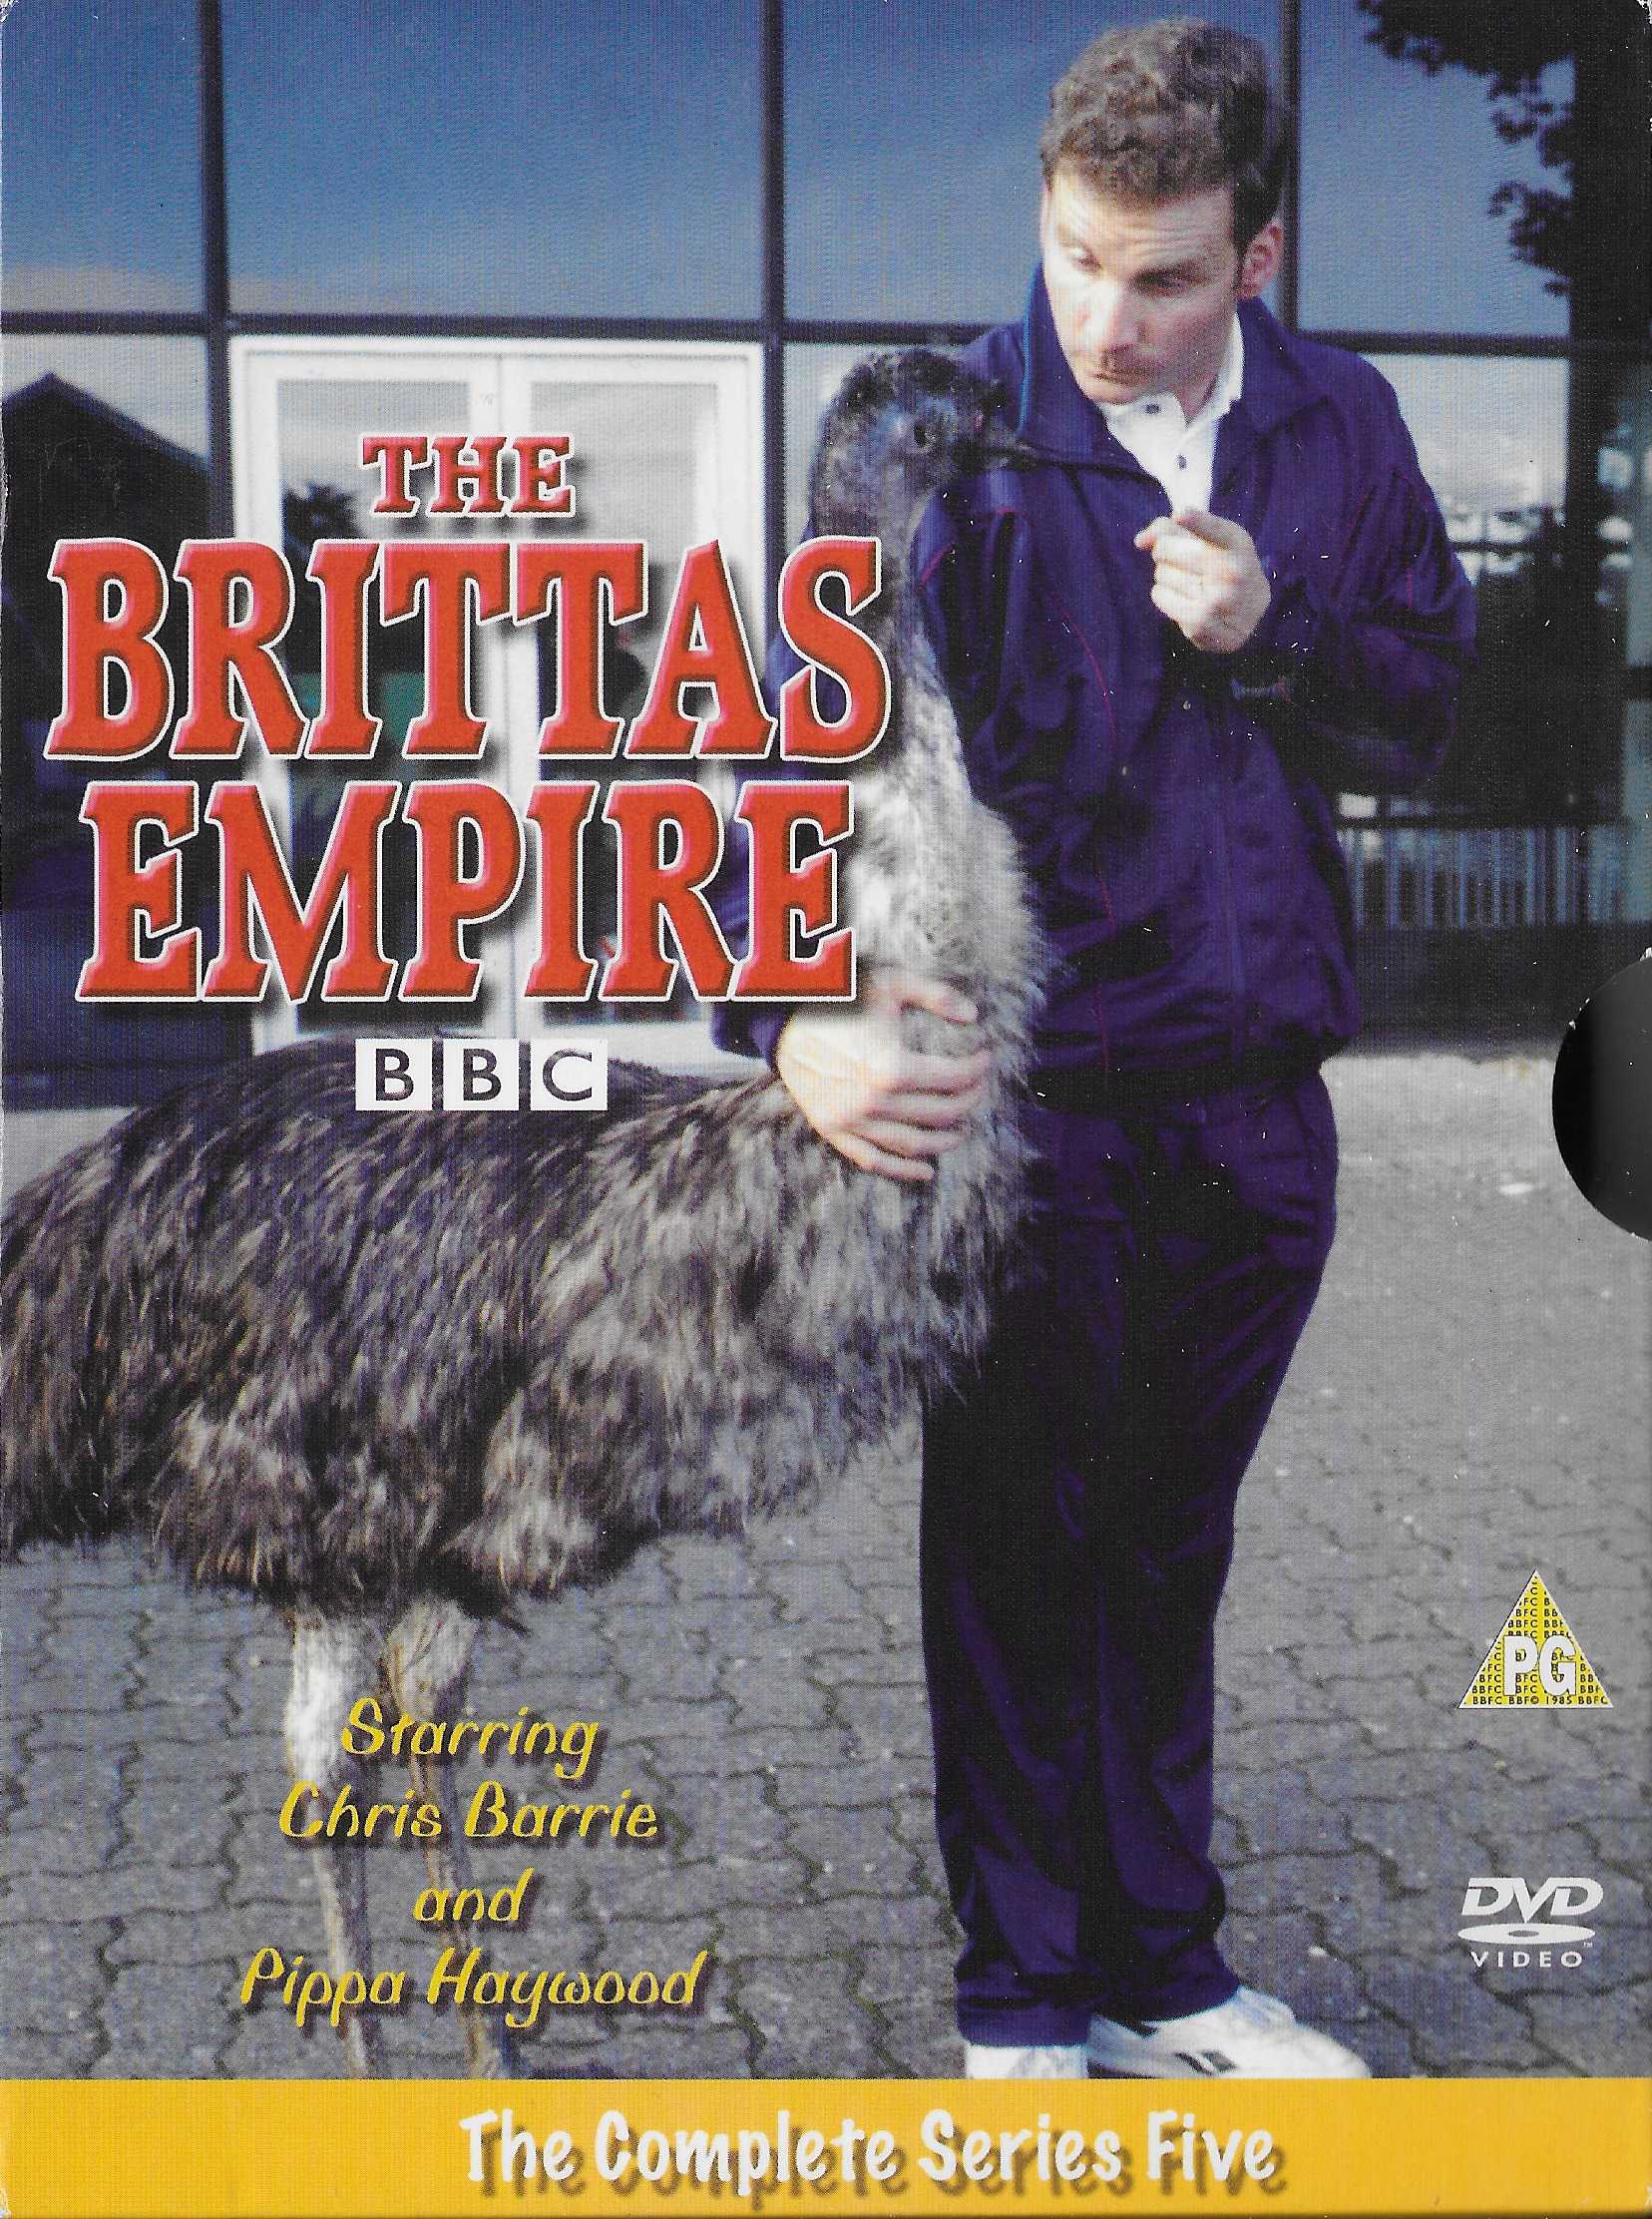 Picture of The Brittas empire - Series 5 by artist Richard Fegen / Andrew Norriss from the BBC dvds - Records and Tapes library